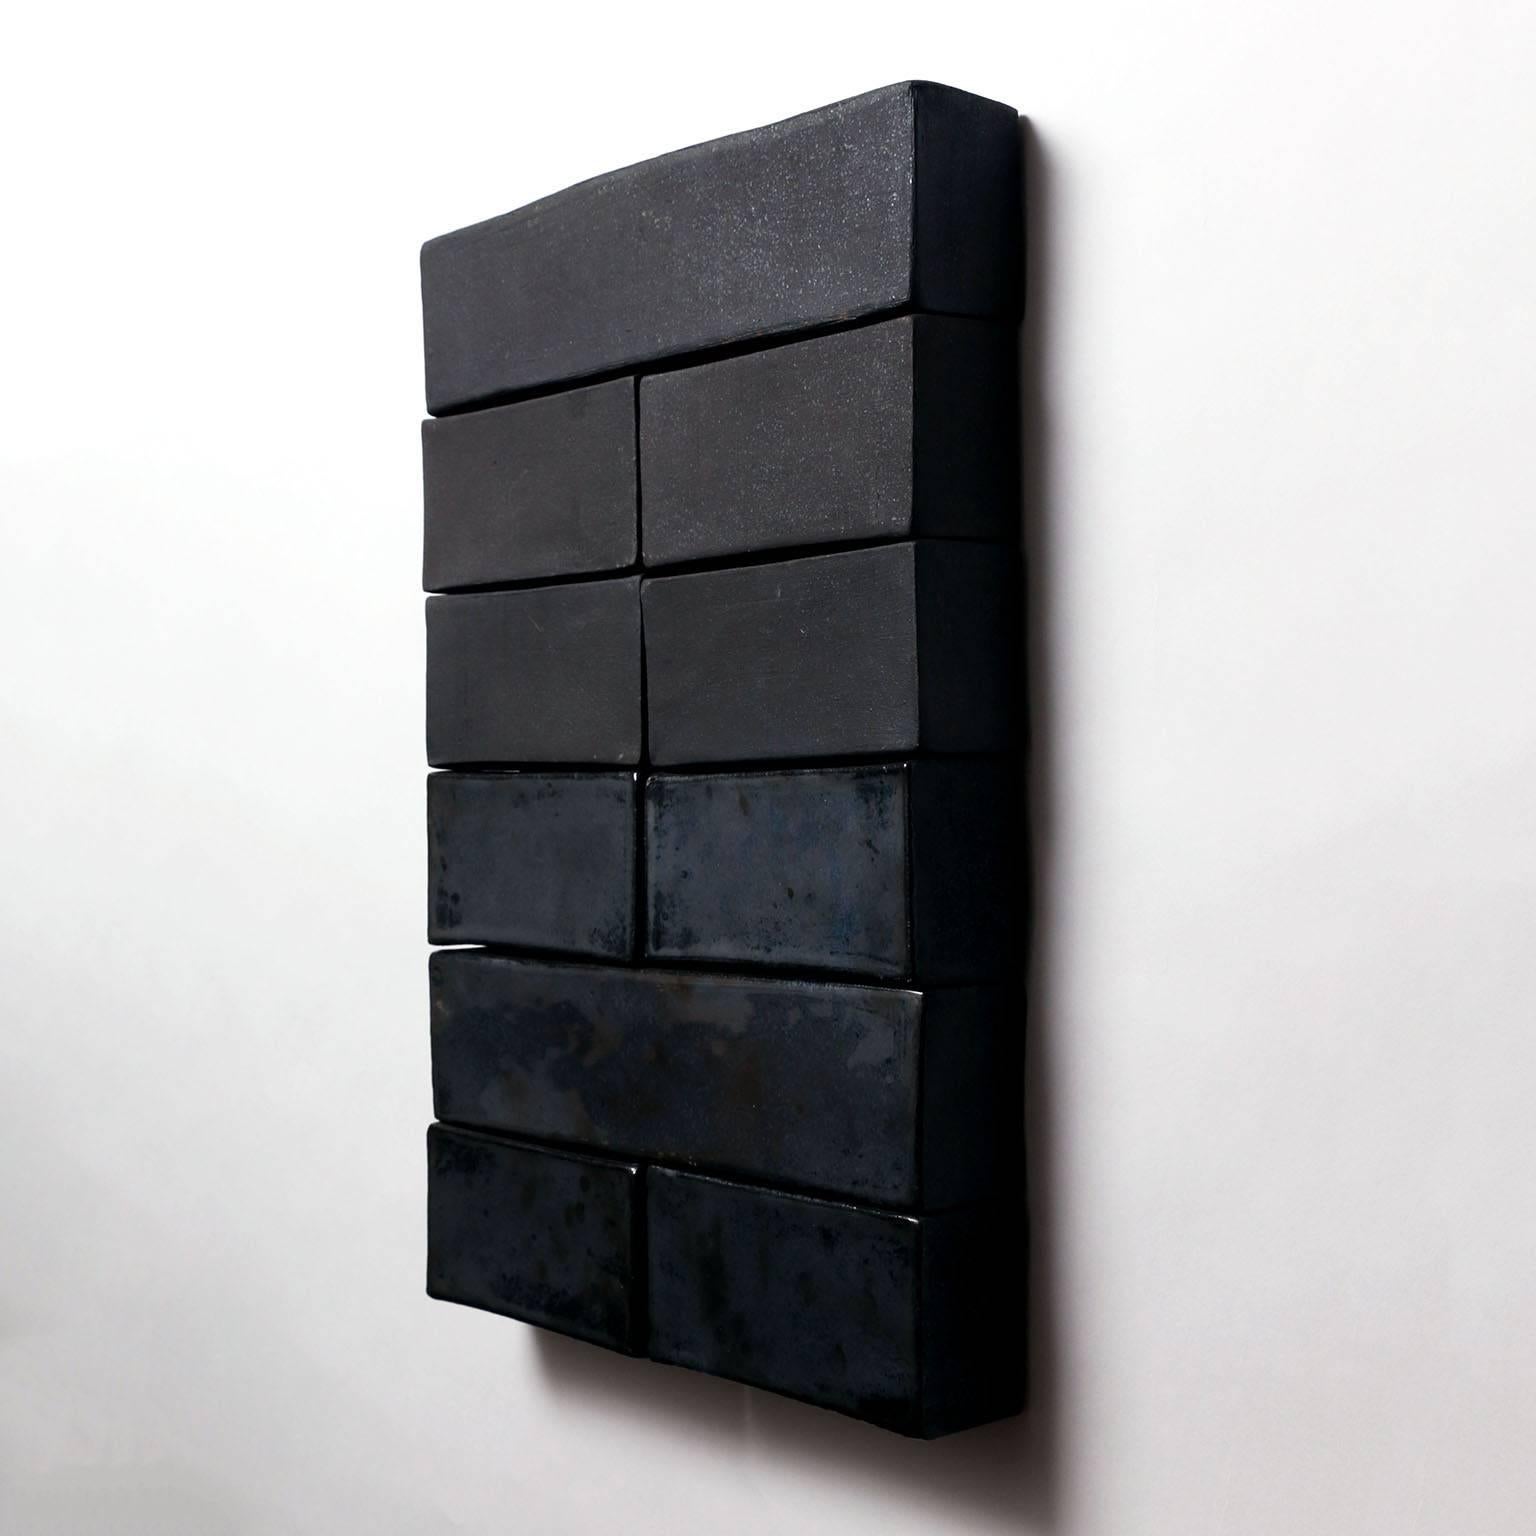 Amazing ceramic wall sculpture by ceramic artist, John Sheppard, circa 2016. This piece features two different style glazes, a beautiful iridescent black glaze and a black matte coal glaze which make for a very pleasing contrast. 

Artist